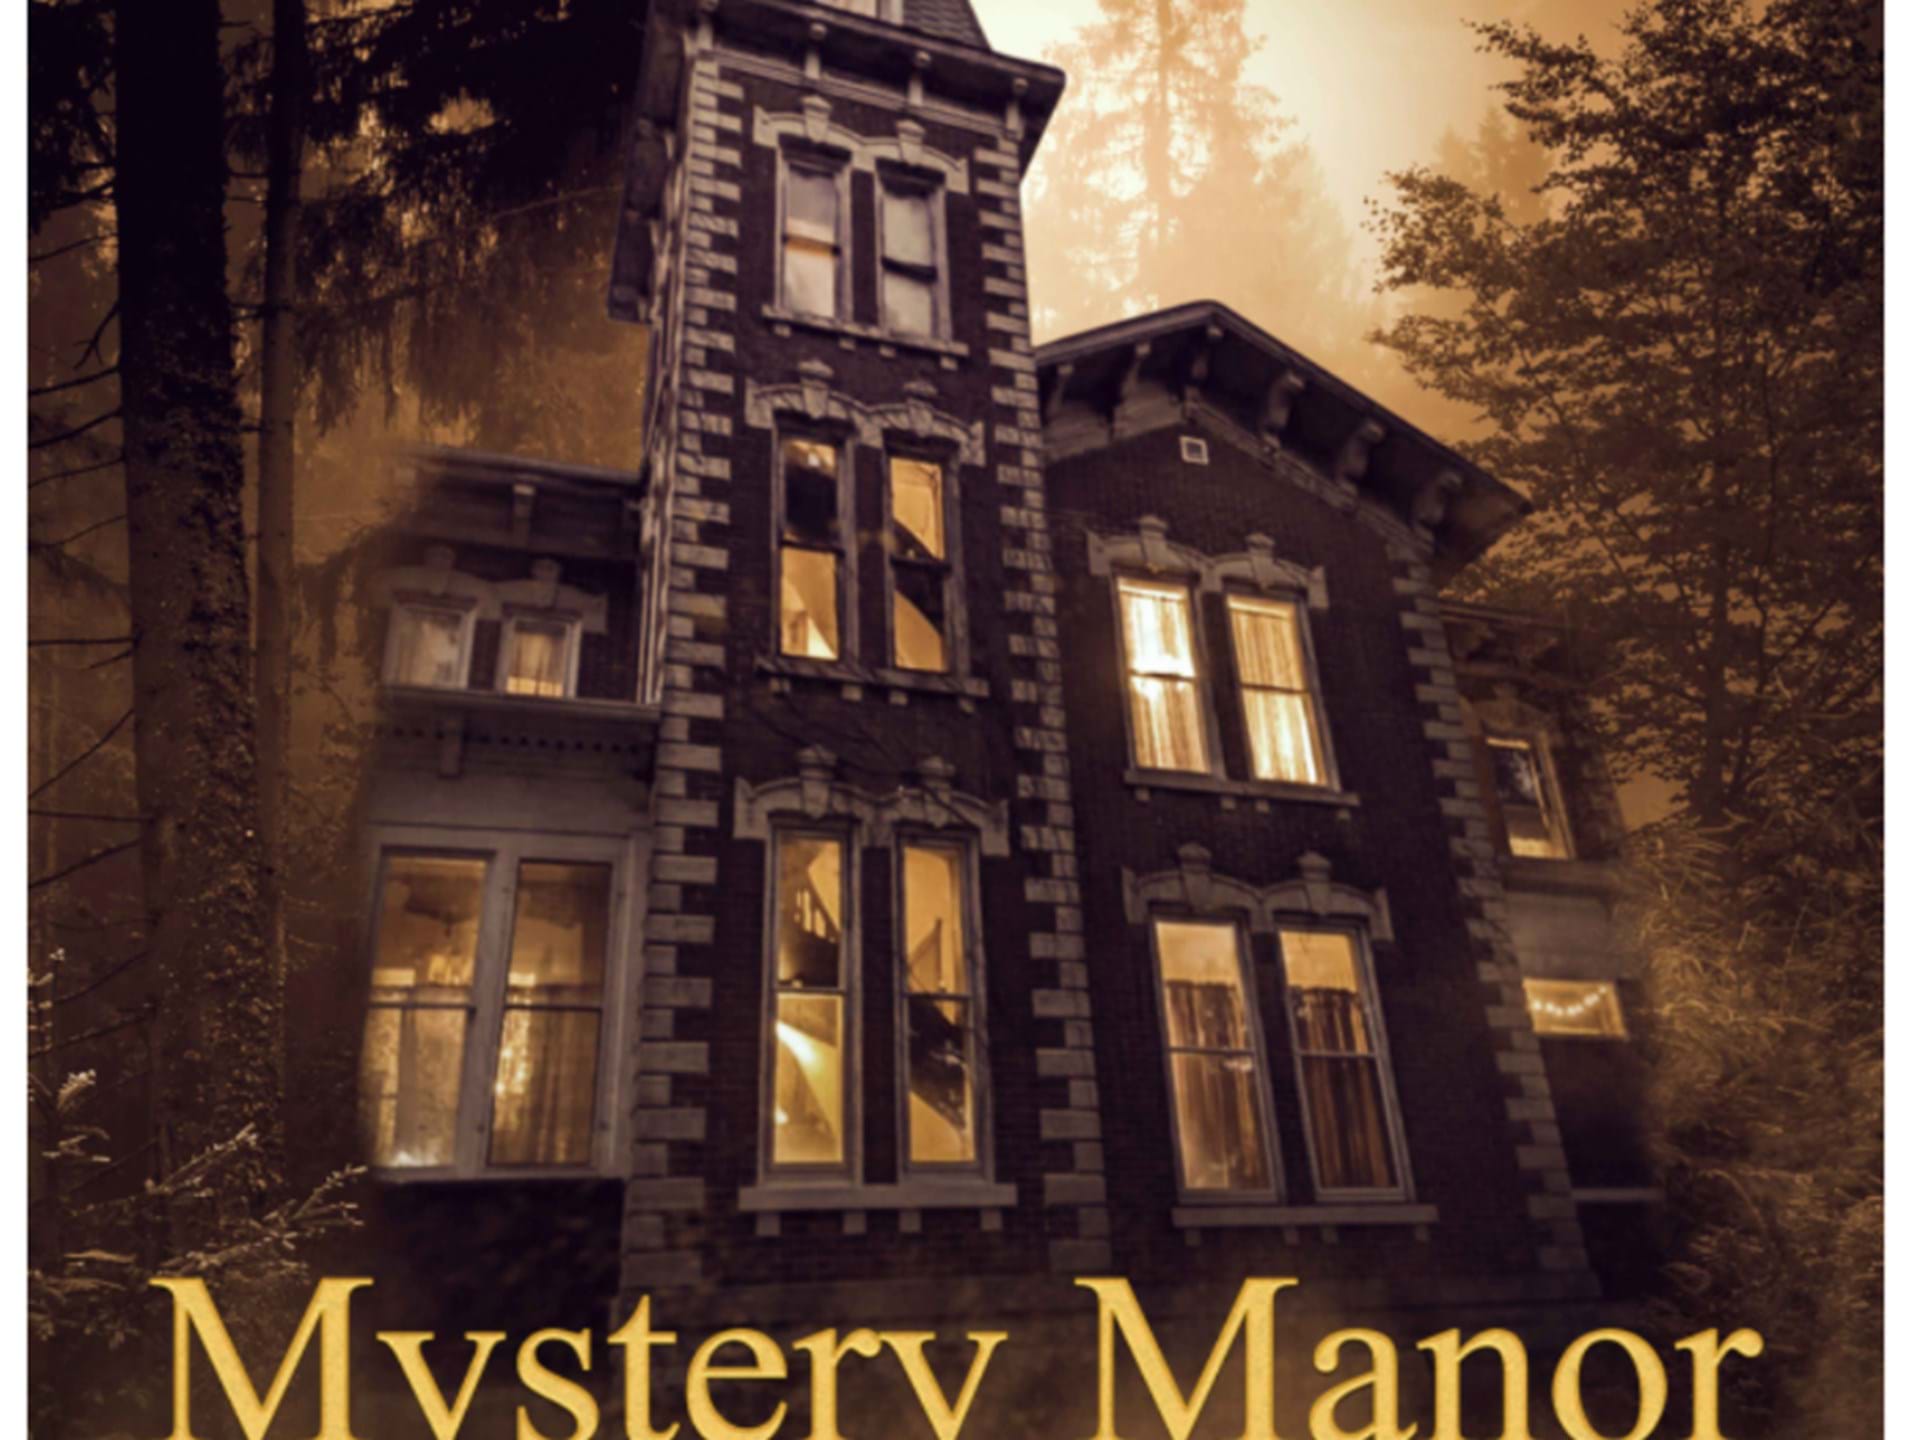 Mapletown Manor available for mystery events